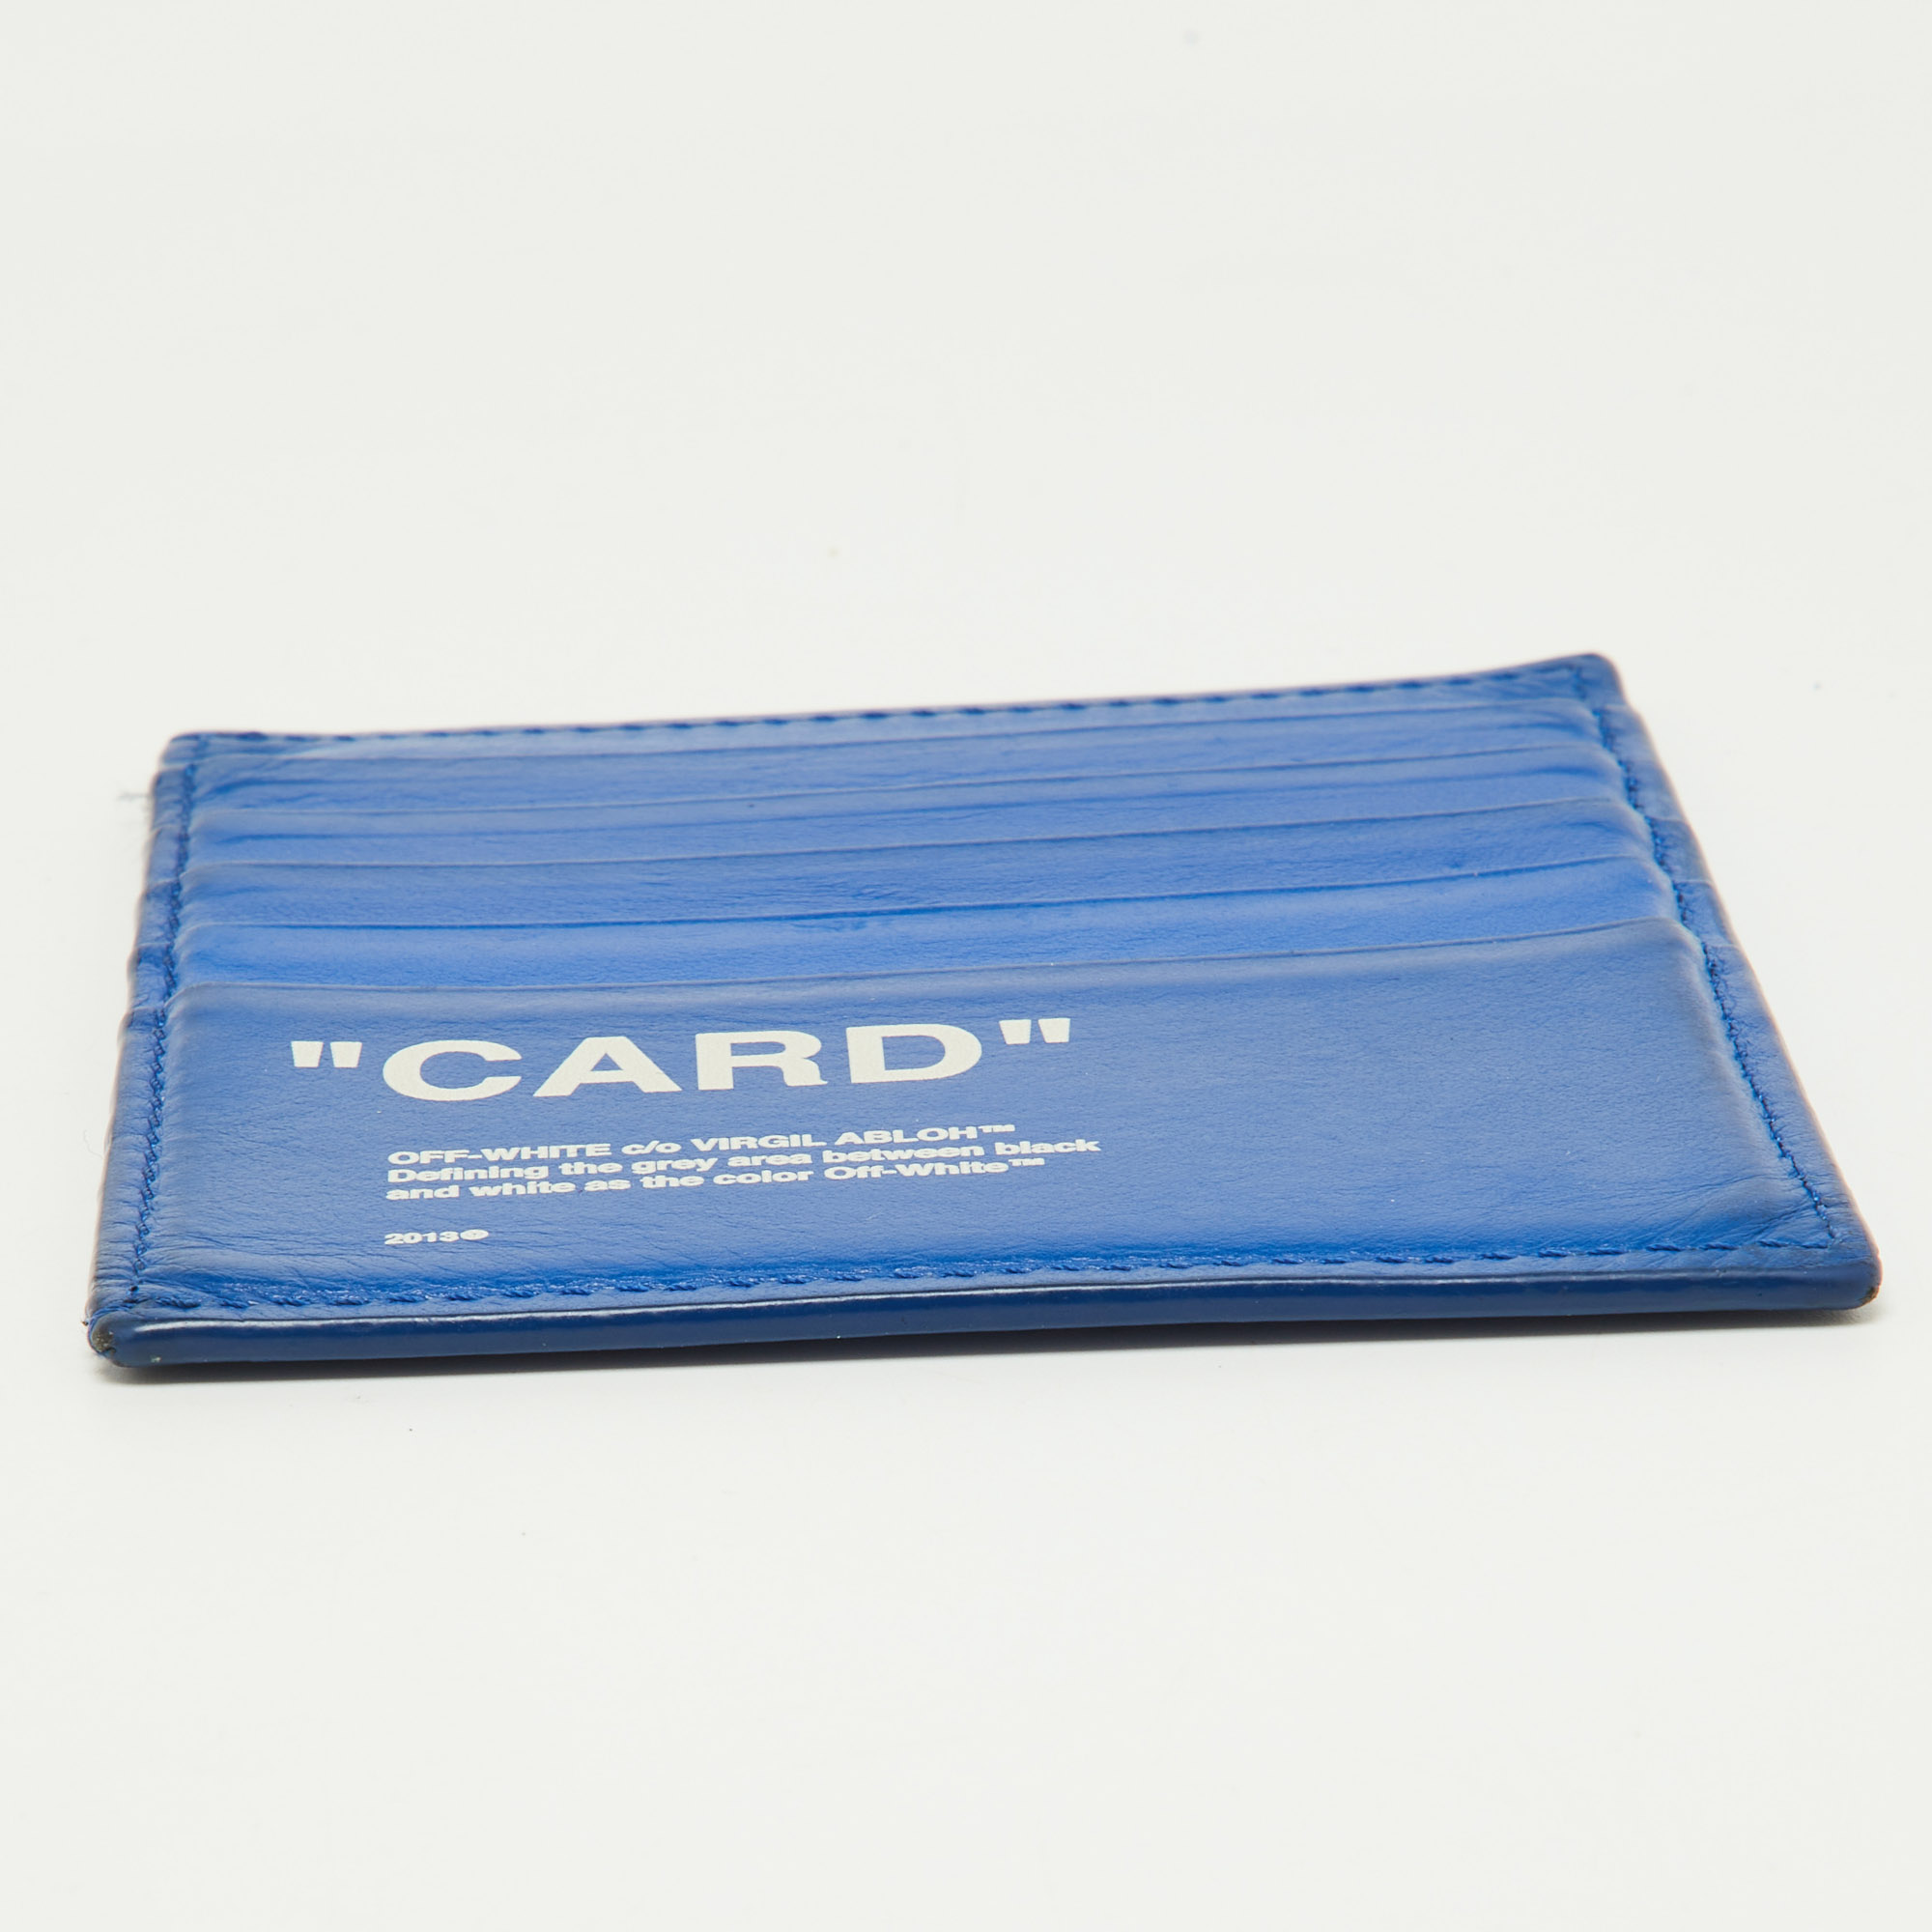 Off White Blue Leather For Cards Holder